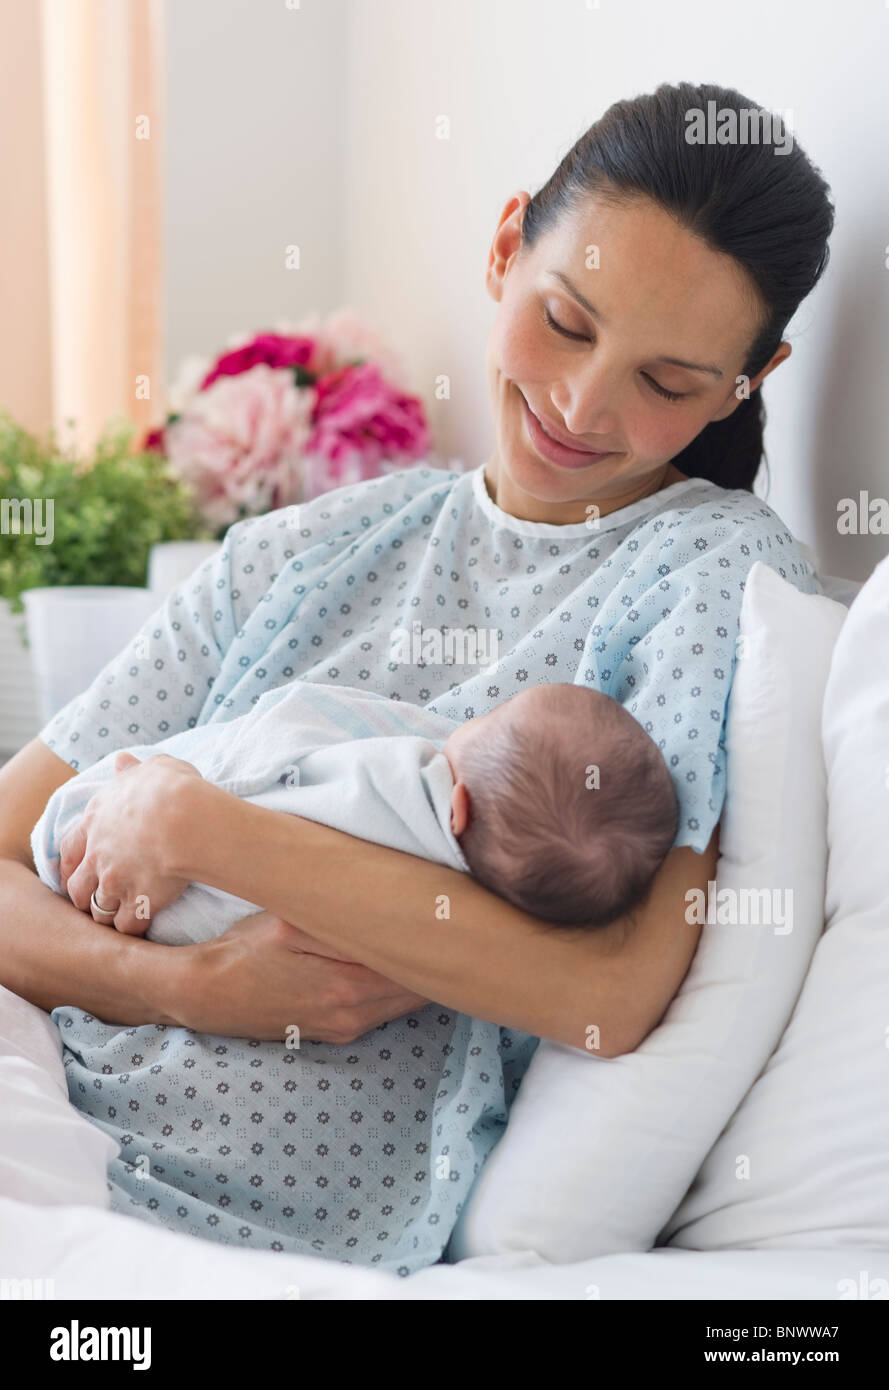 Mother holding newborn baby in hospital bed Stock Photo